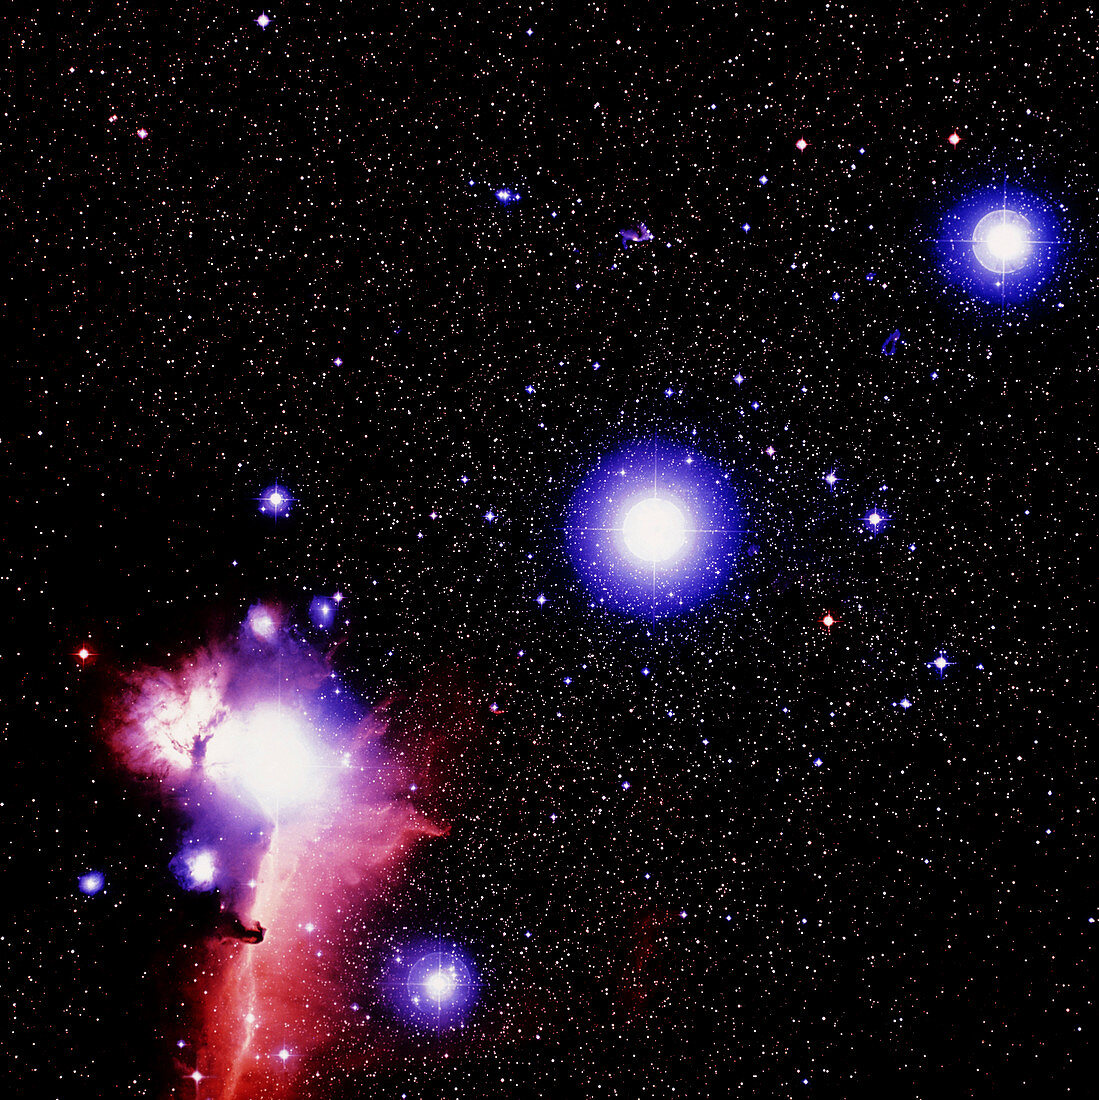 Optical image of the stars of Orion's belt